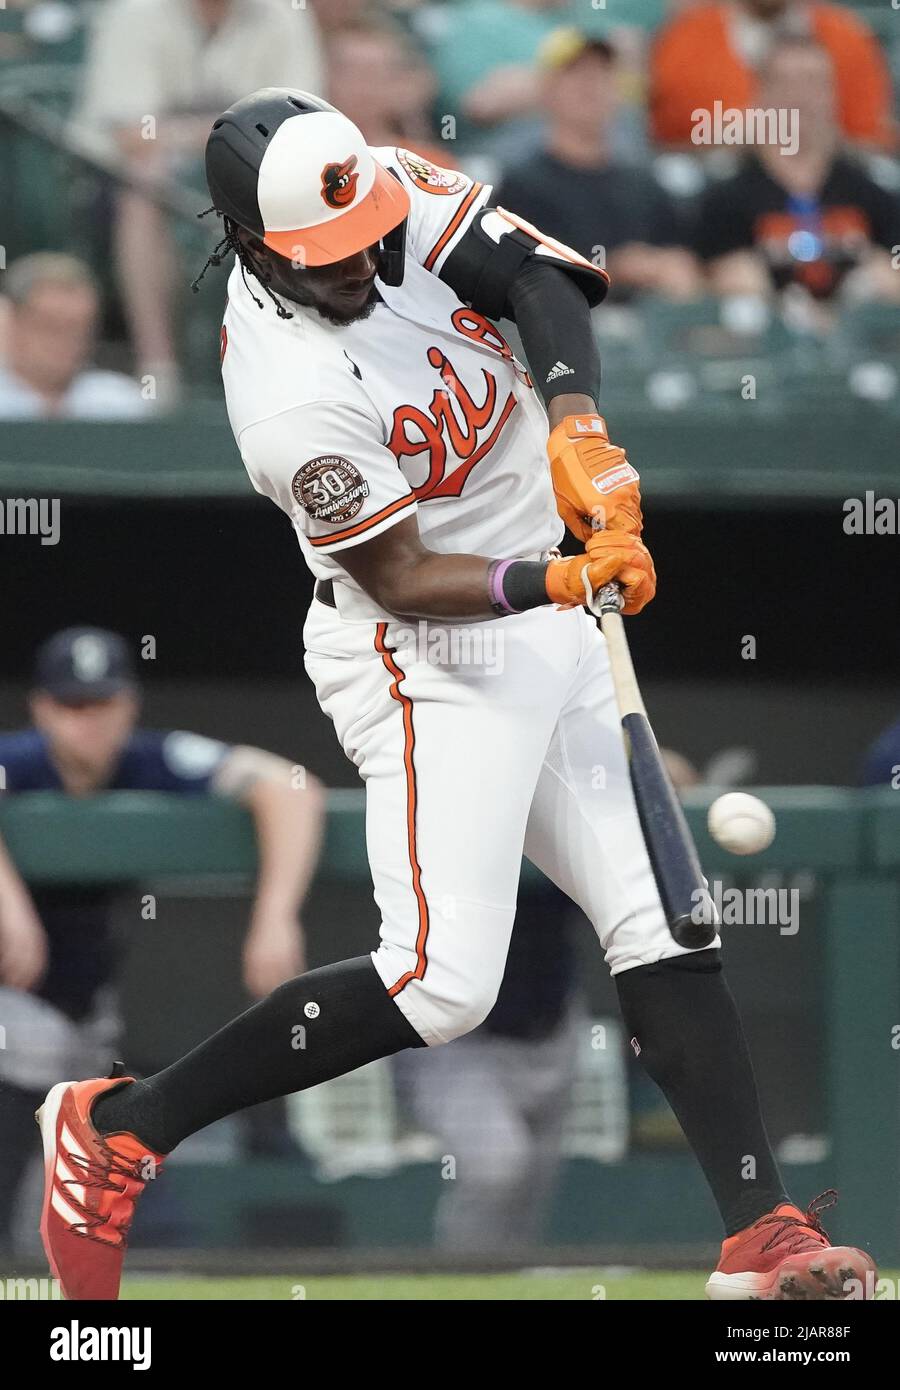 BALTIMORE, MD - MAY 31: Baltimore Orioles shortstop Jorge Mateo (3) during  a MLB game between the Baltimore Orioles and the Seattle Mariners, on May  31, 2022, at Orioles Park at Camden